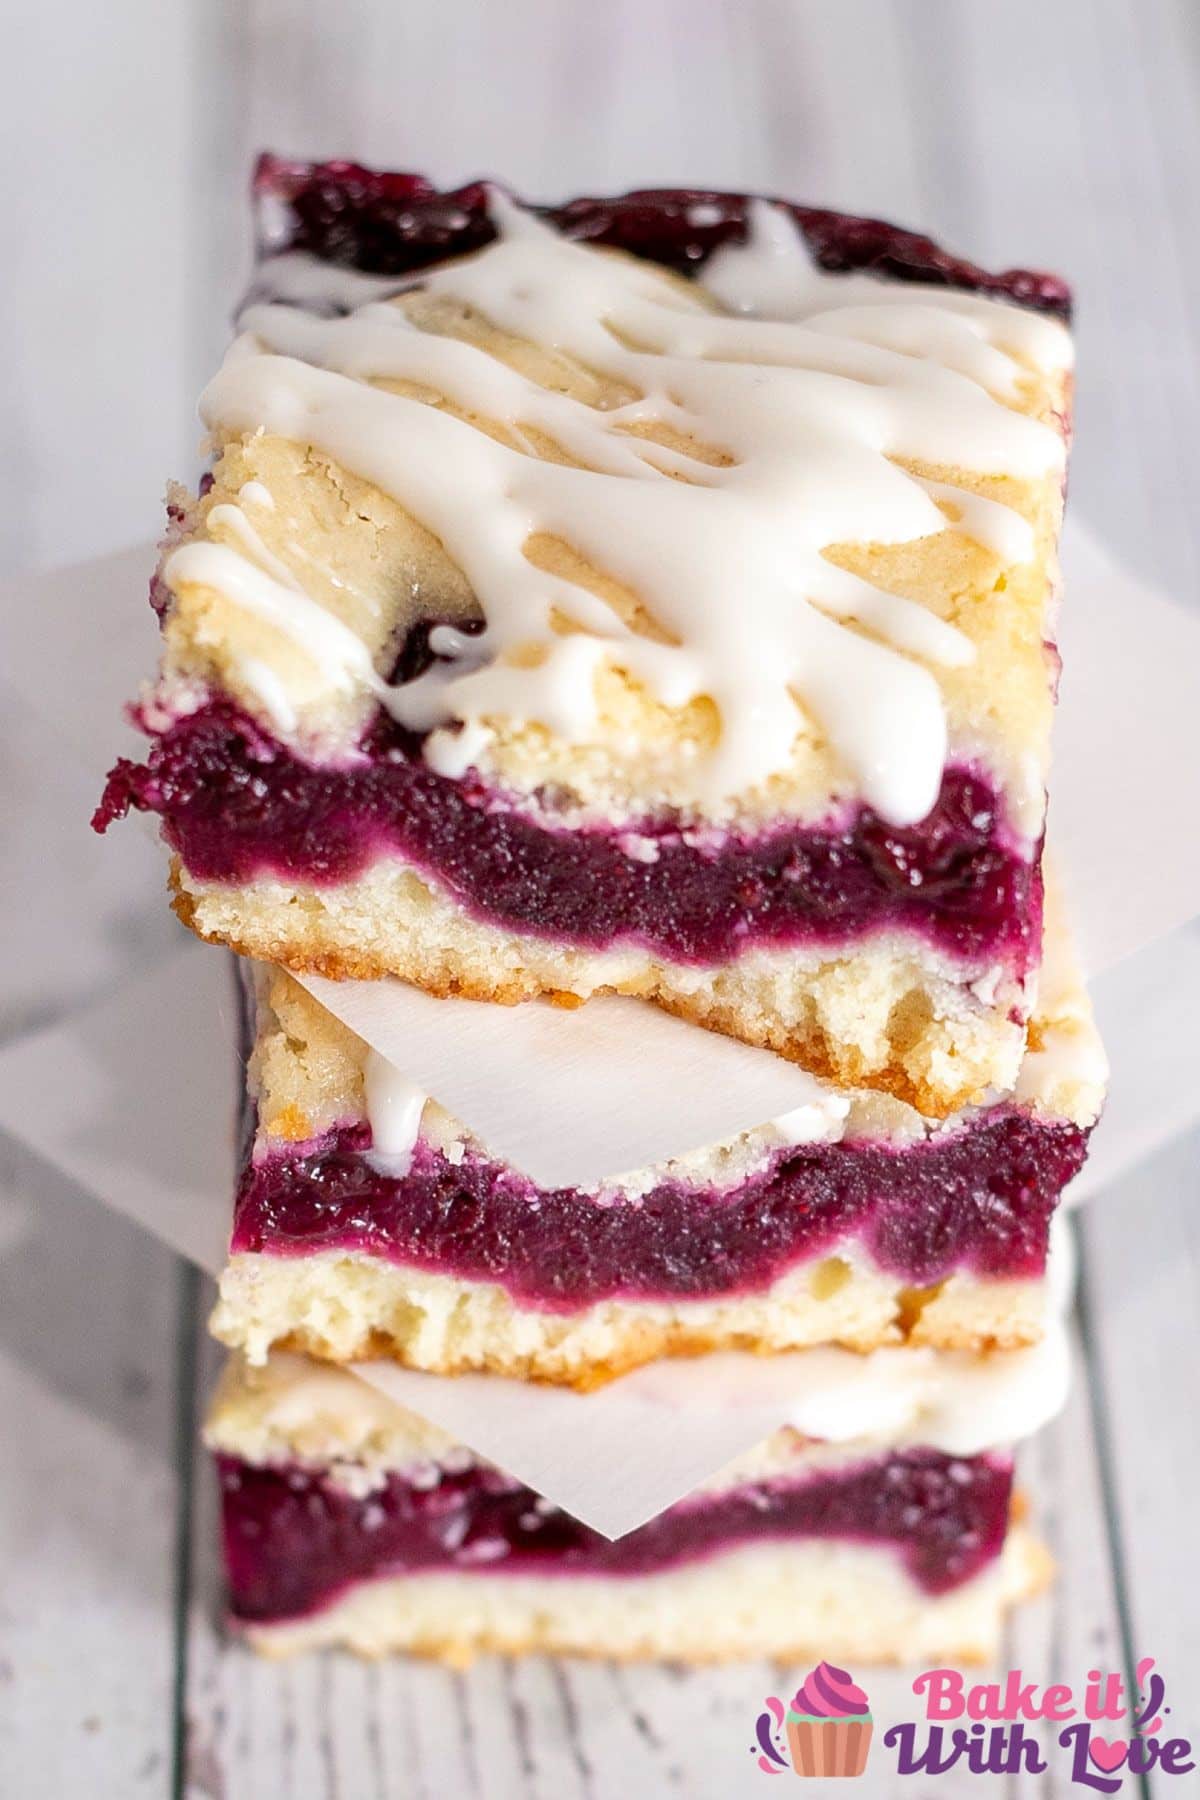 Best blueberry pie bars recipe with creamy icing, sliced and stacked on light background.